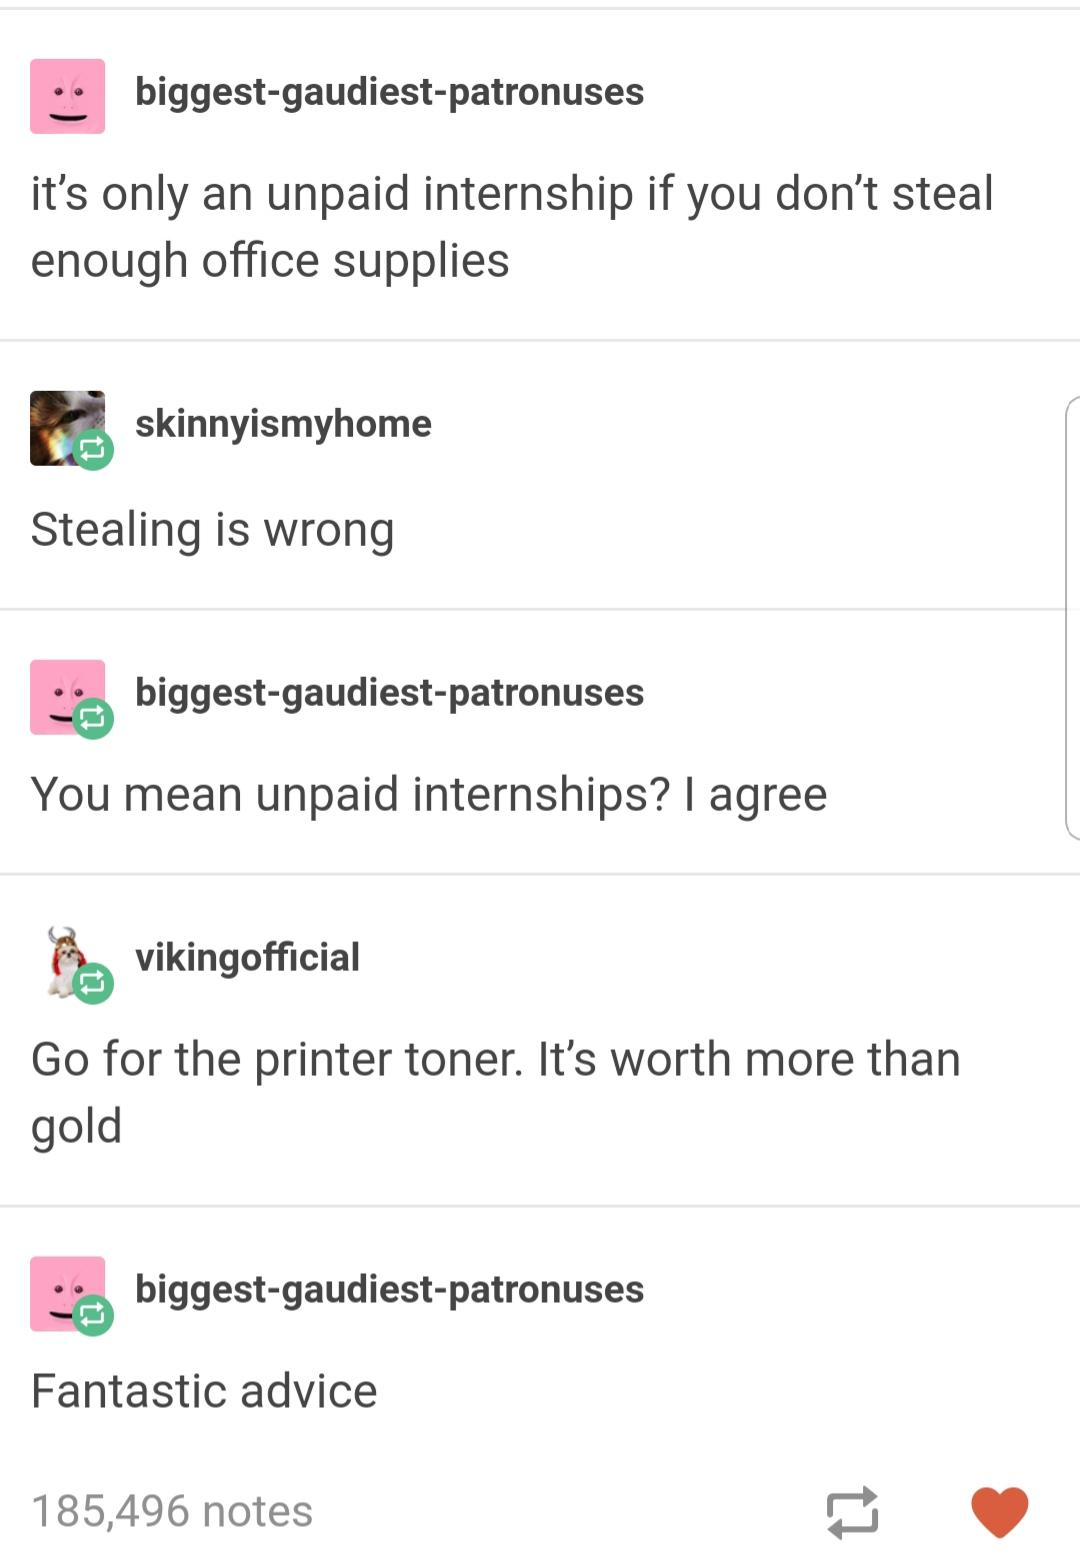 unpaid internships - biggestgaudiestpatronuses it's only an unpaid internship if you don't steal enough office supplies skinnyismyhome Stealing is wrong biggestgaudiestpatronuses You mean unpaid internships? I agree vikingofficial Go for the printer toner